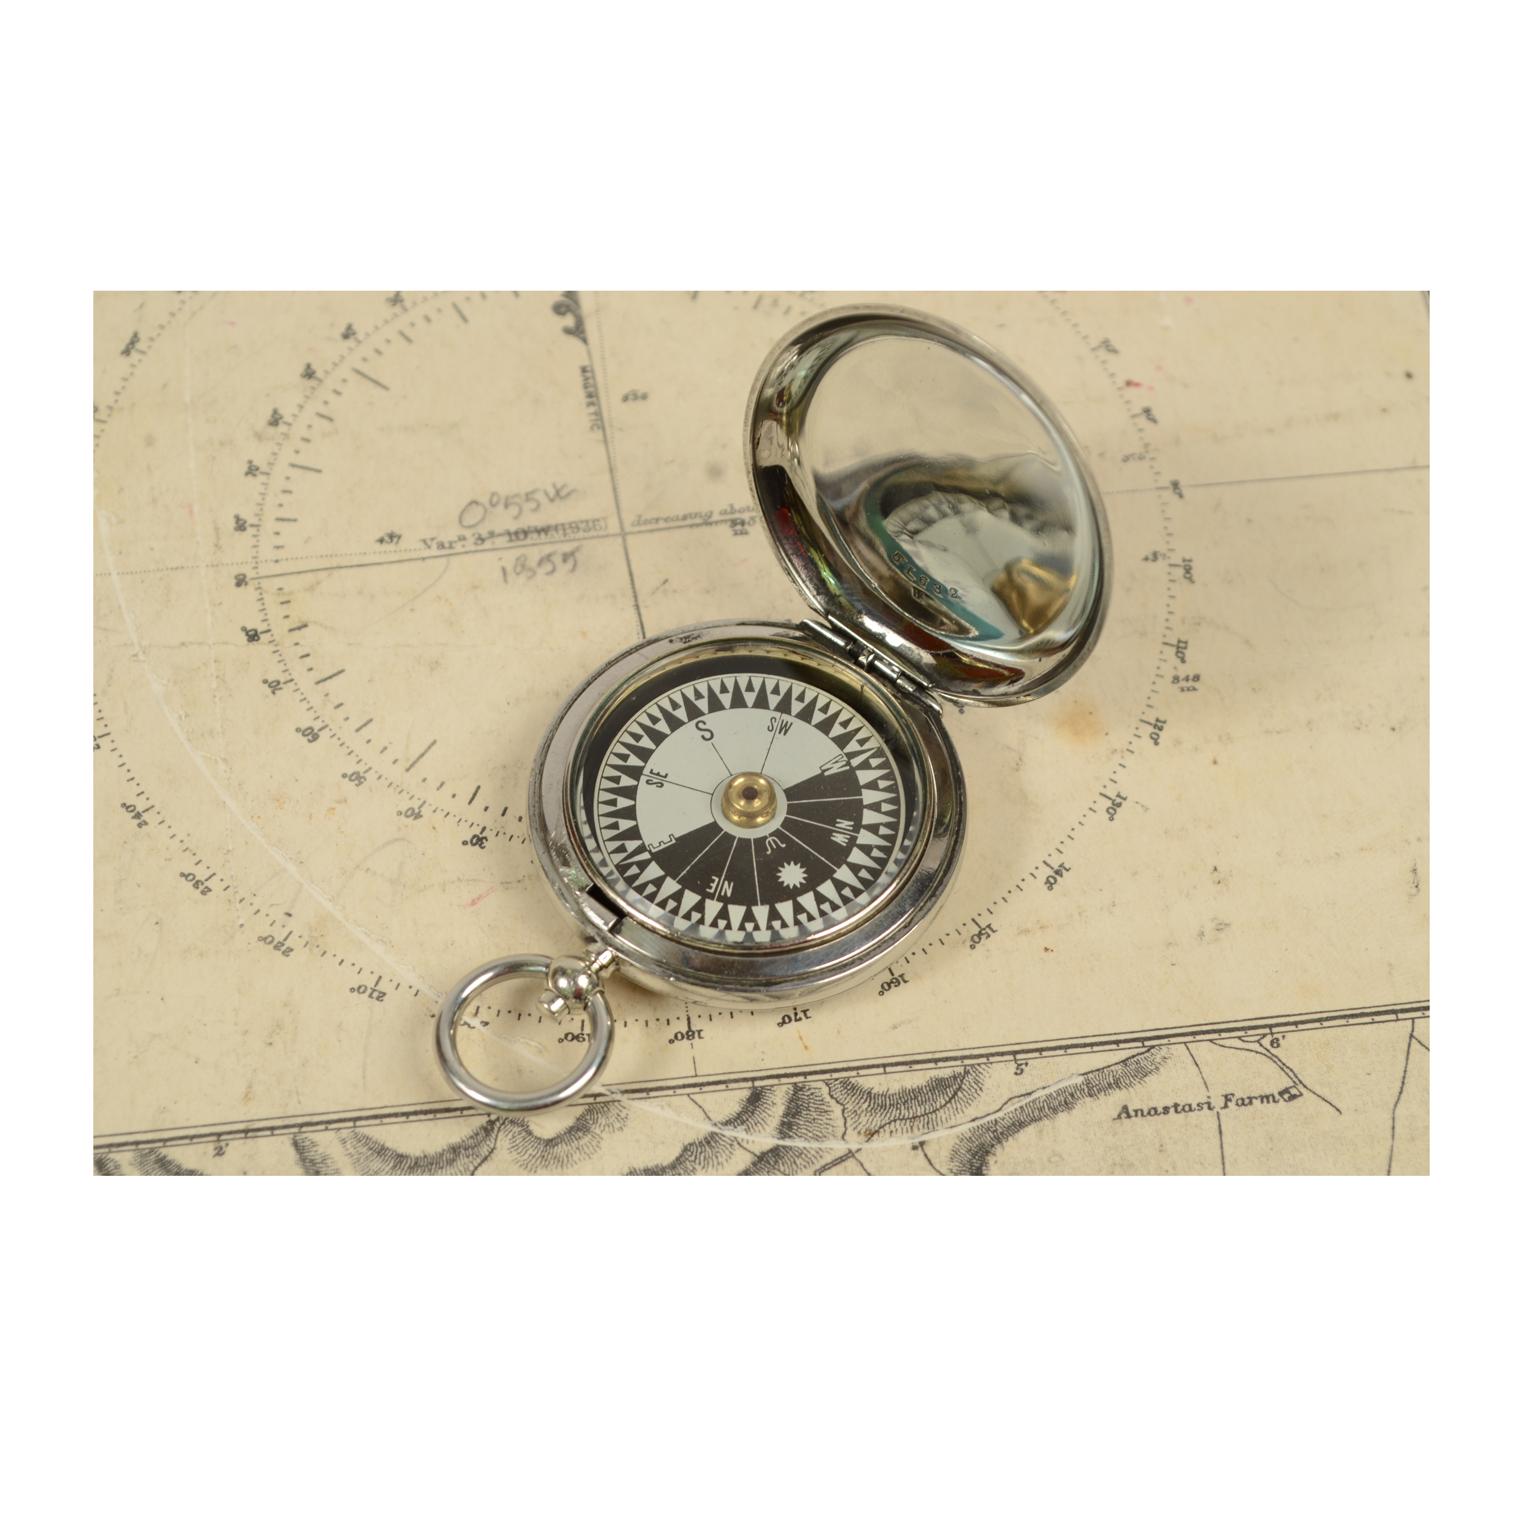 Pocket compass used by the Royal Air Force officers in 1916 circa made of chromed brass in the shape of pocket watch, signed Short & Mason Ltd London V 83417. The compass is equipped with a lid with a snap closure with release button inside ring.